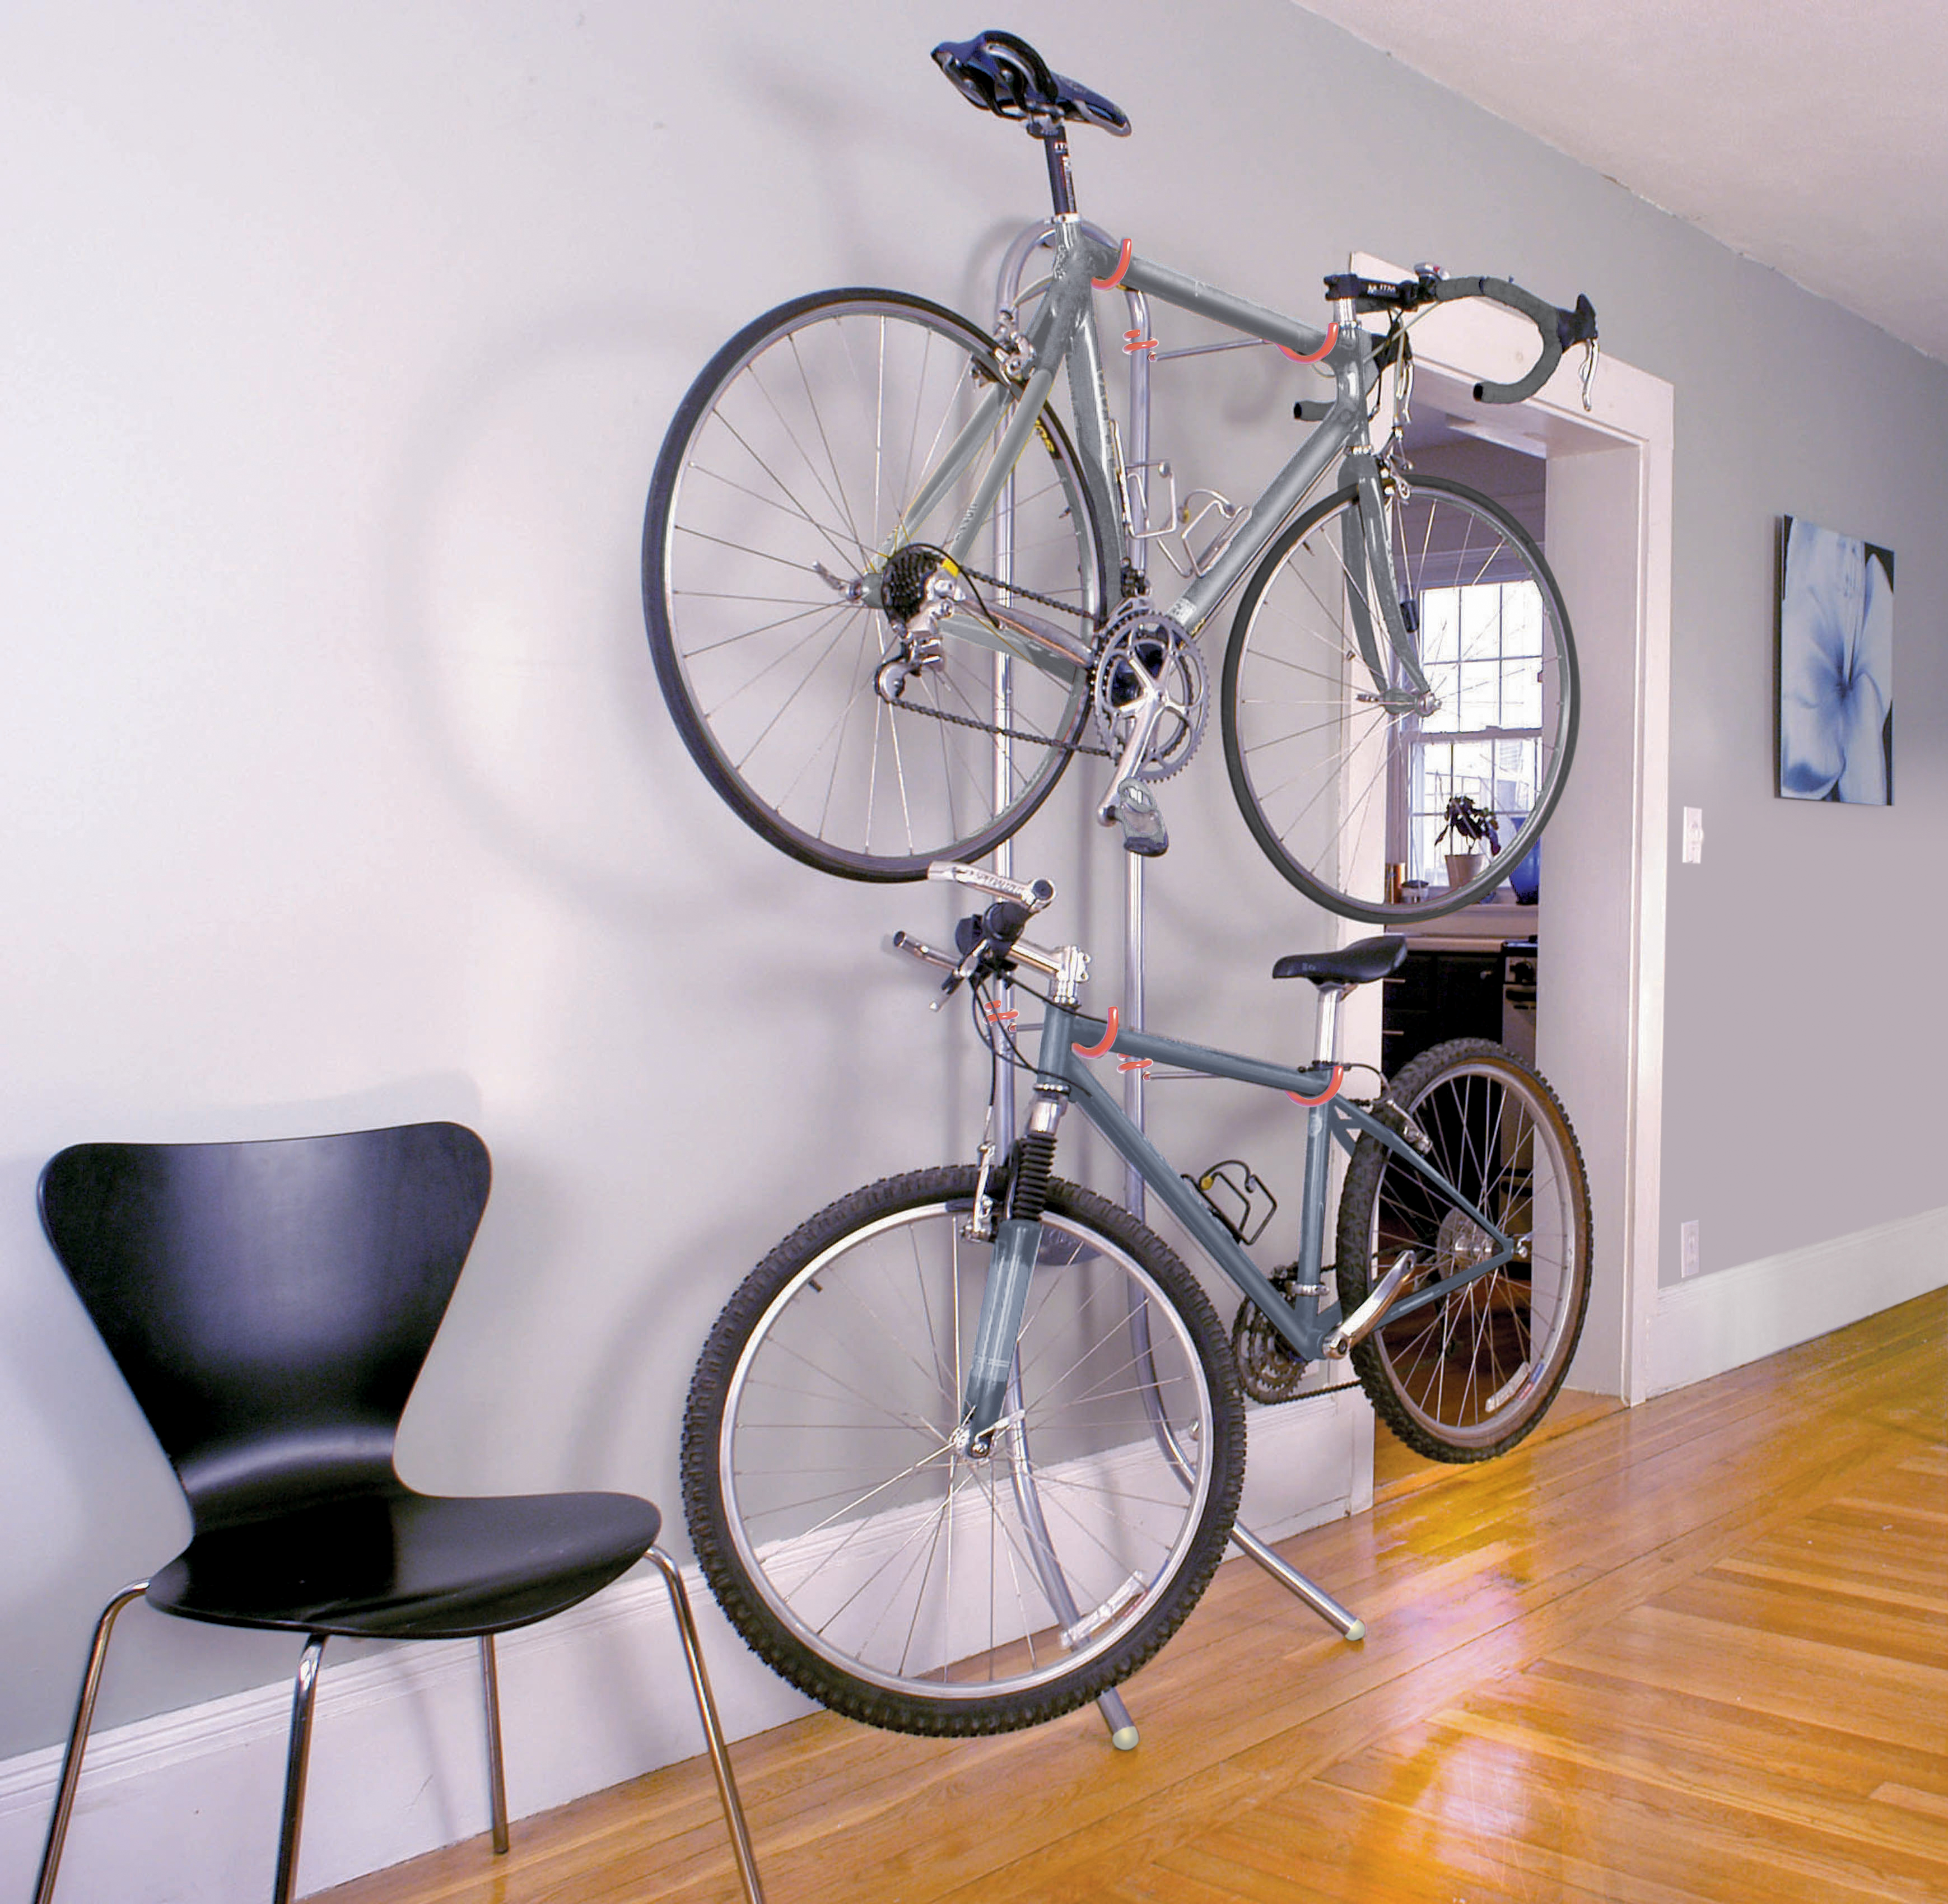 An Art of Storage Michelangelo Two Bike Gravity Storage Rack is leaning against a gray wall in a tiny apartment and storing two gray bikes.